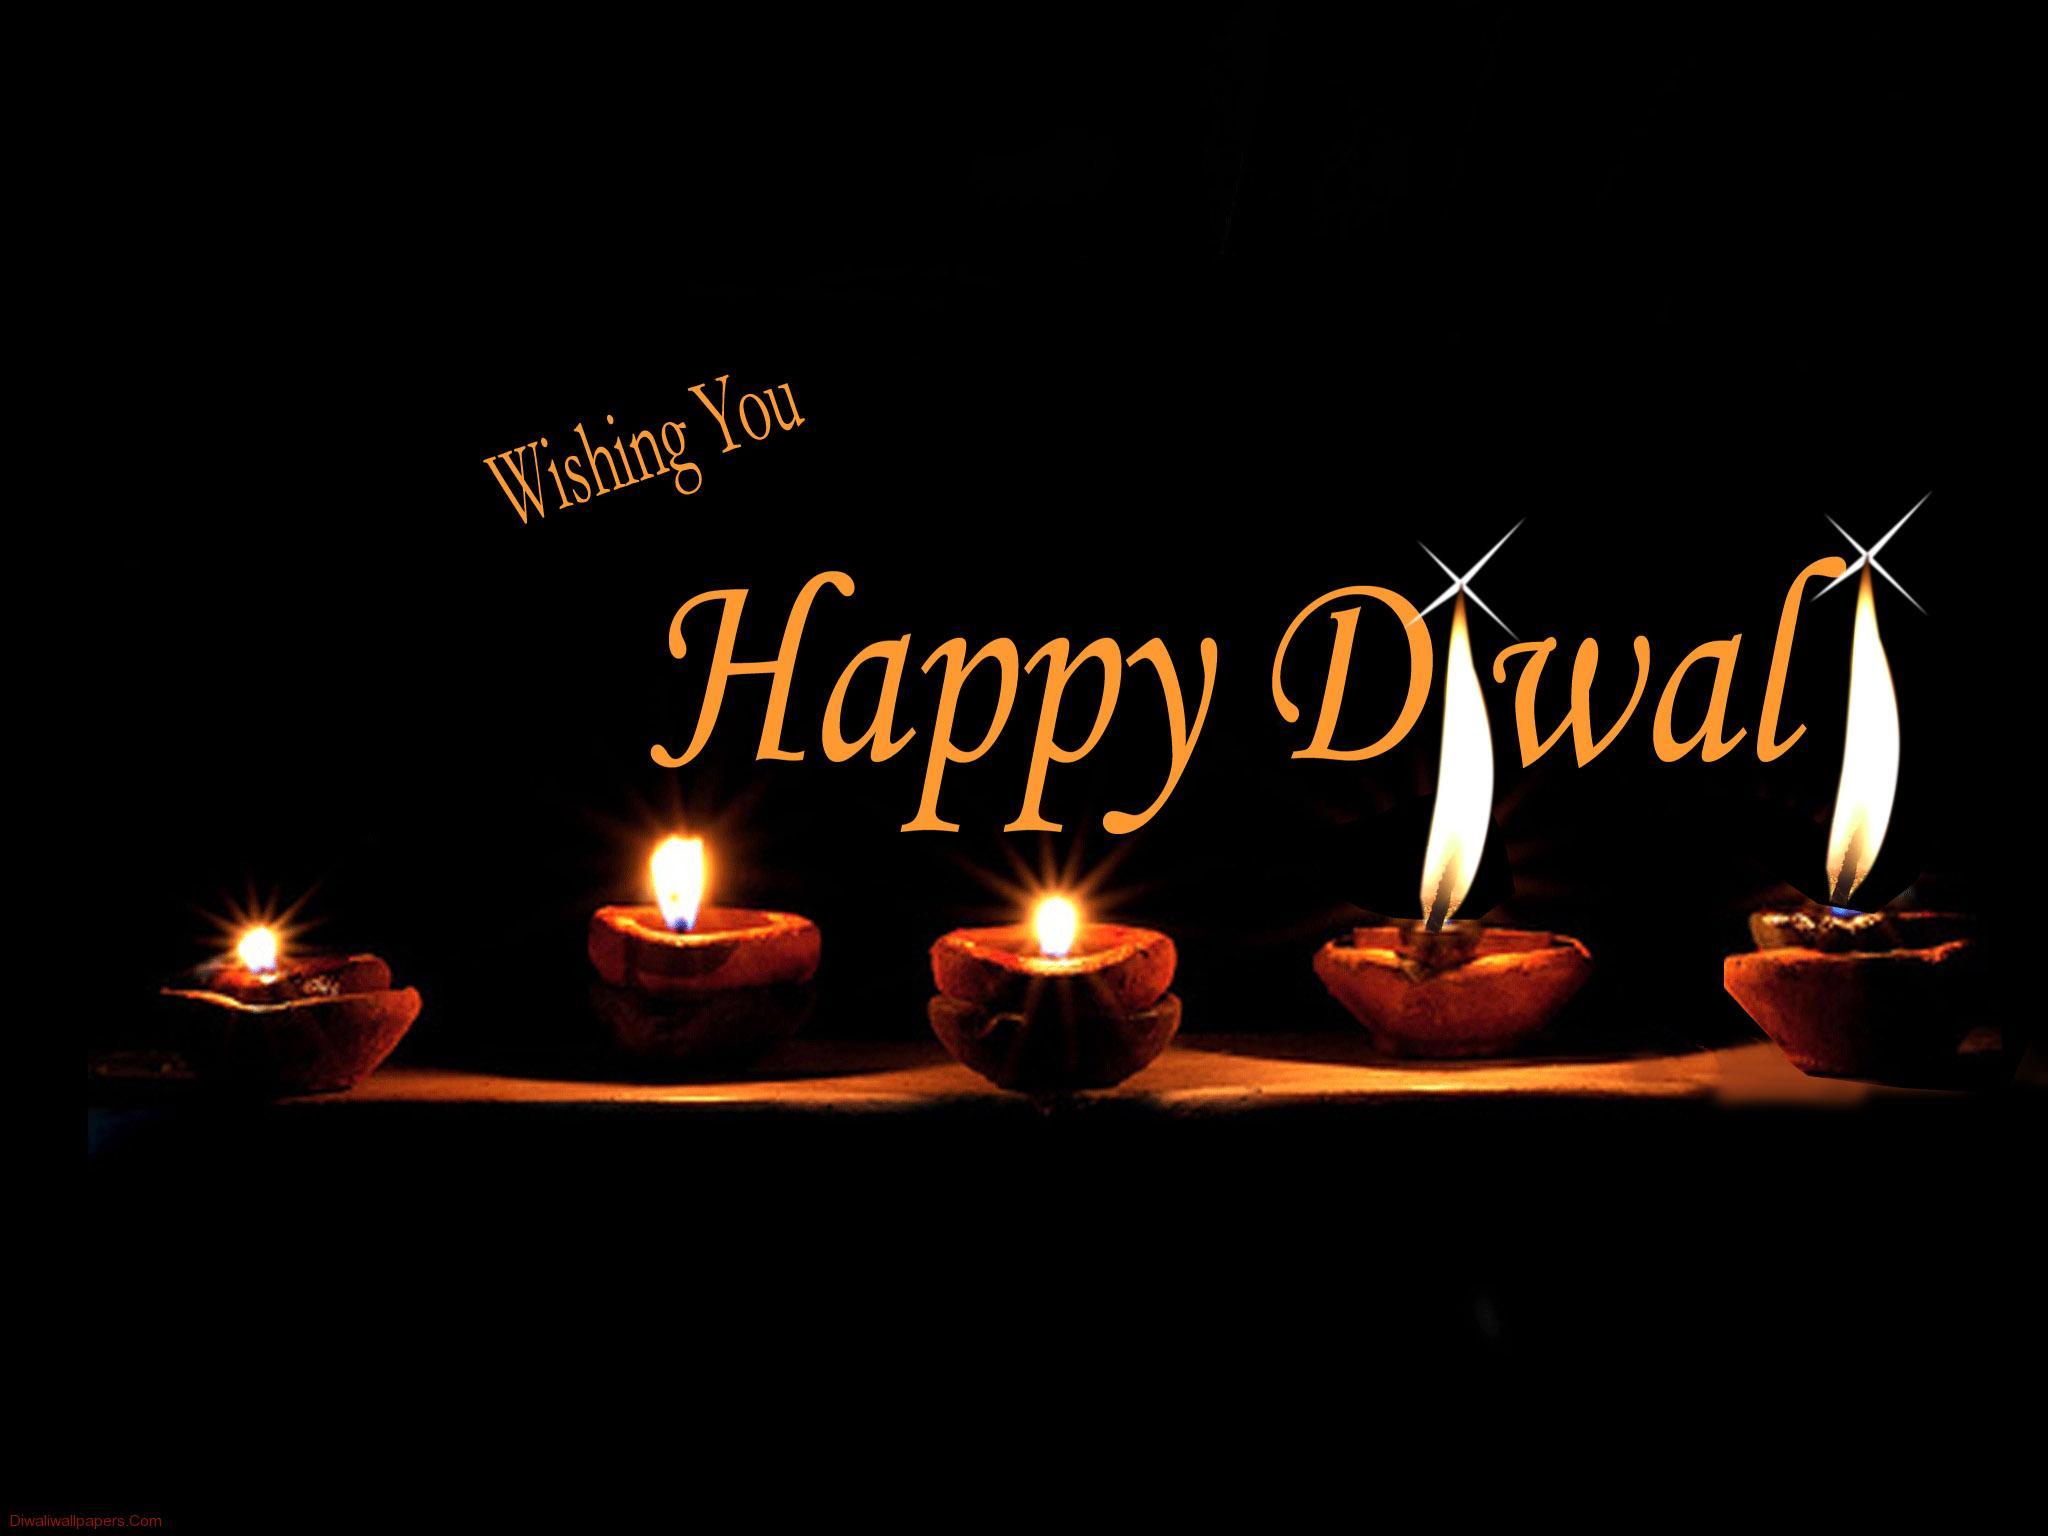 Happy Diwali 2021 Images for Whatsapp